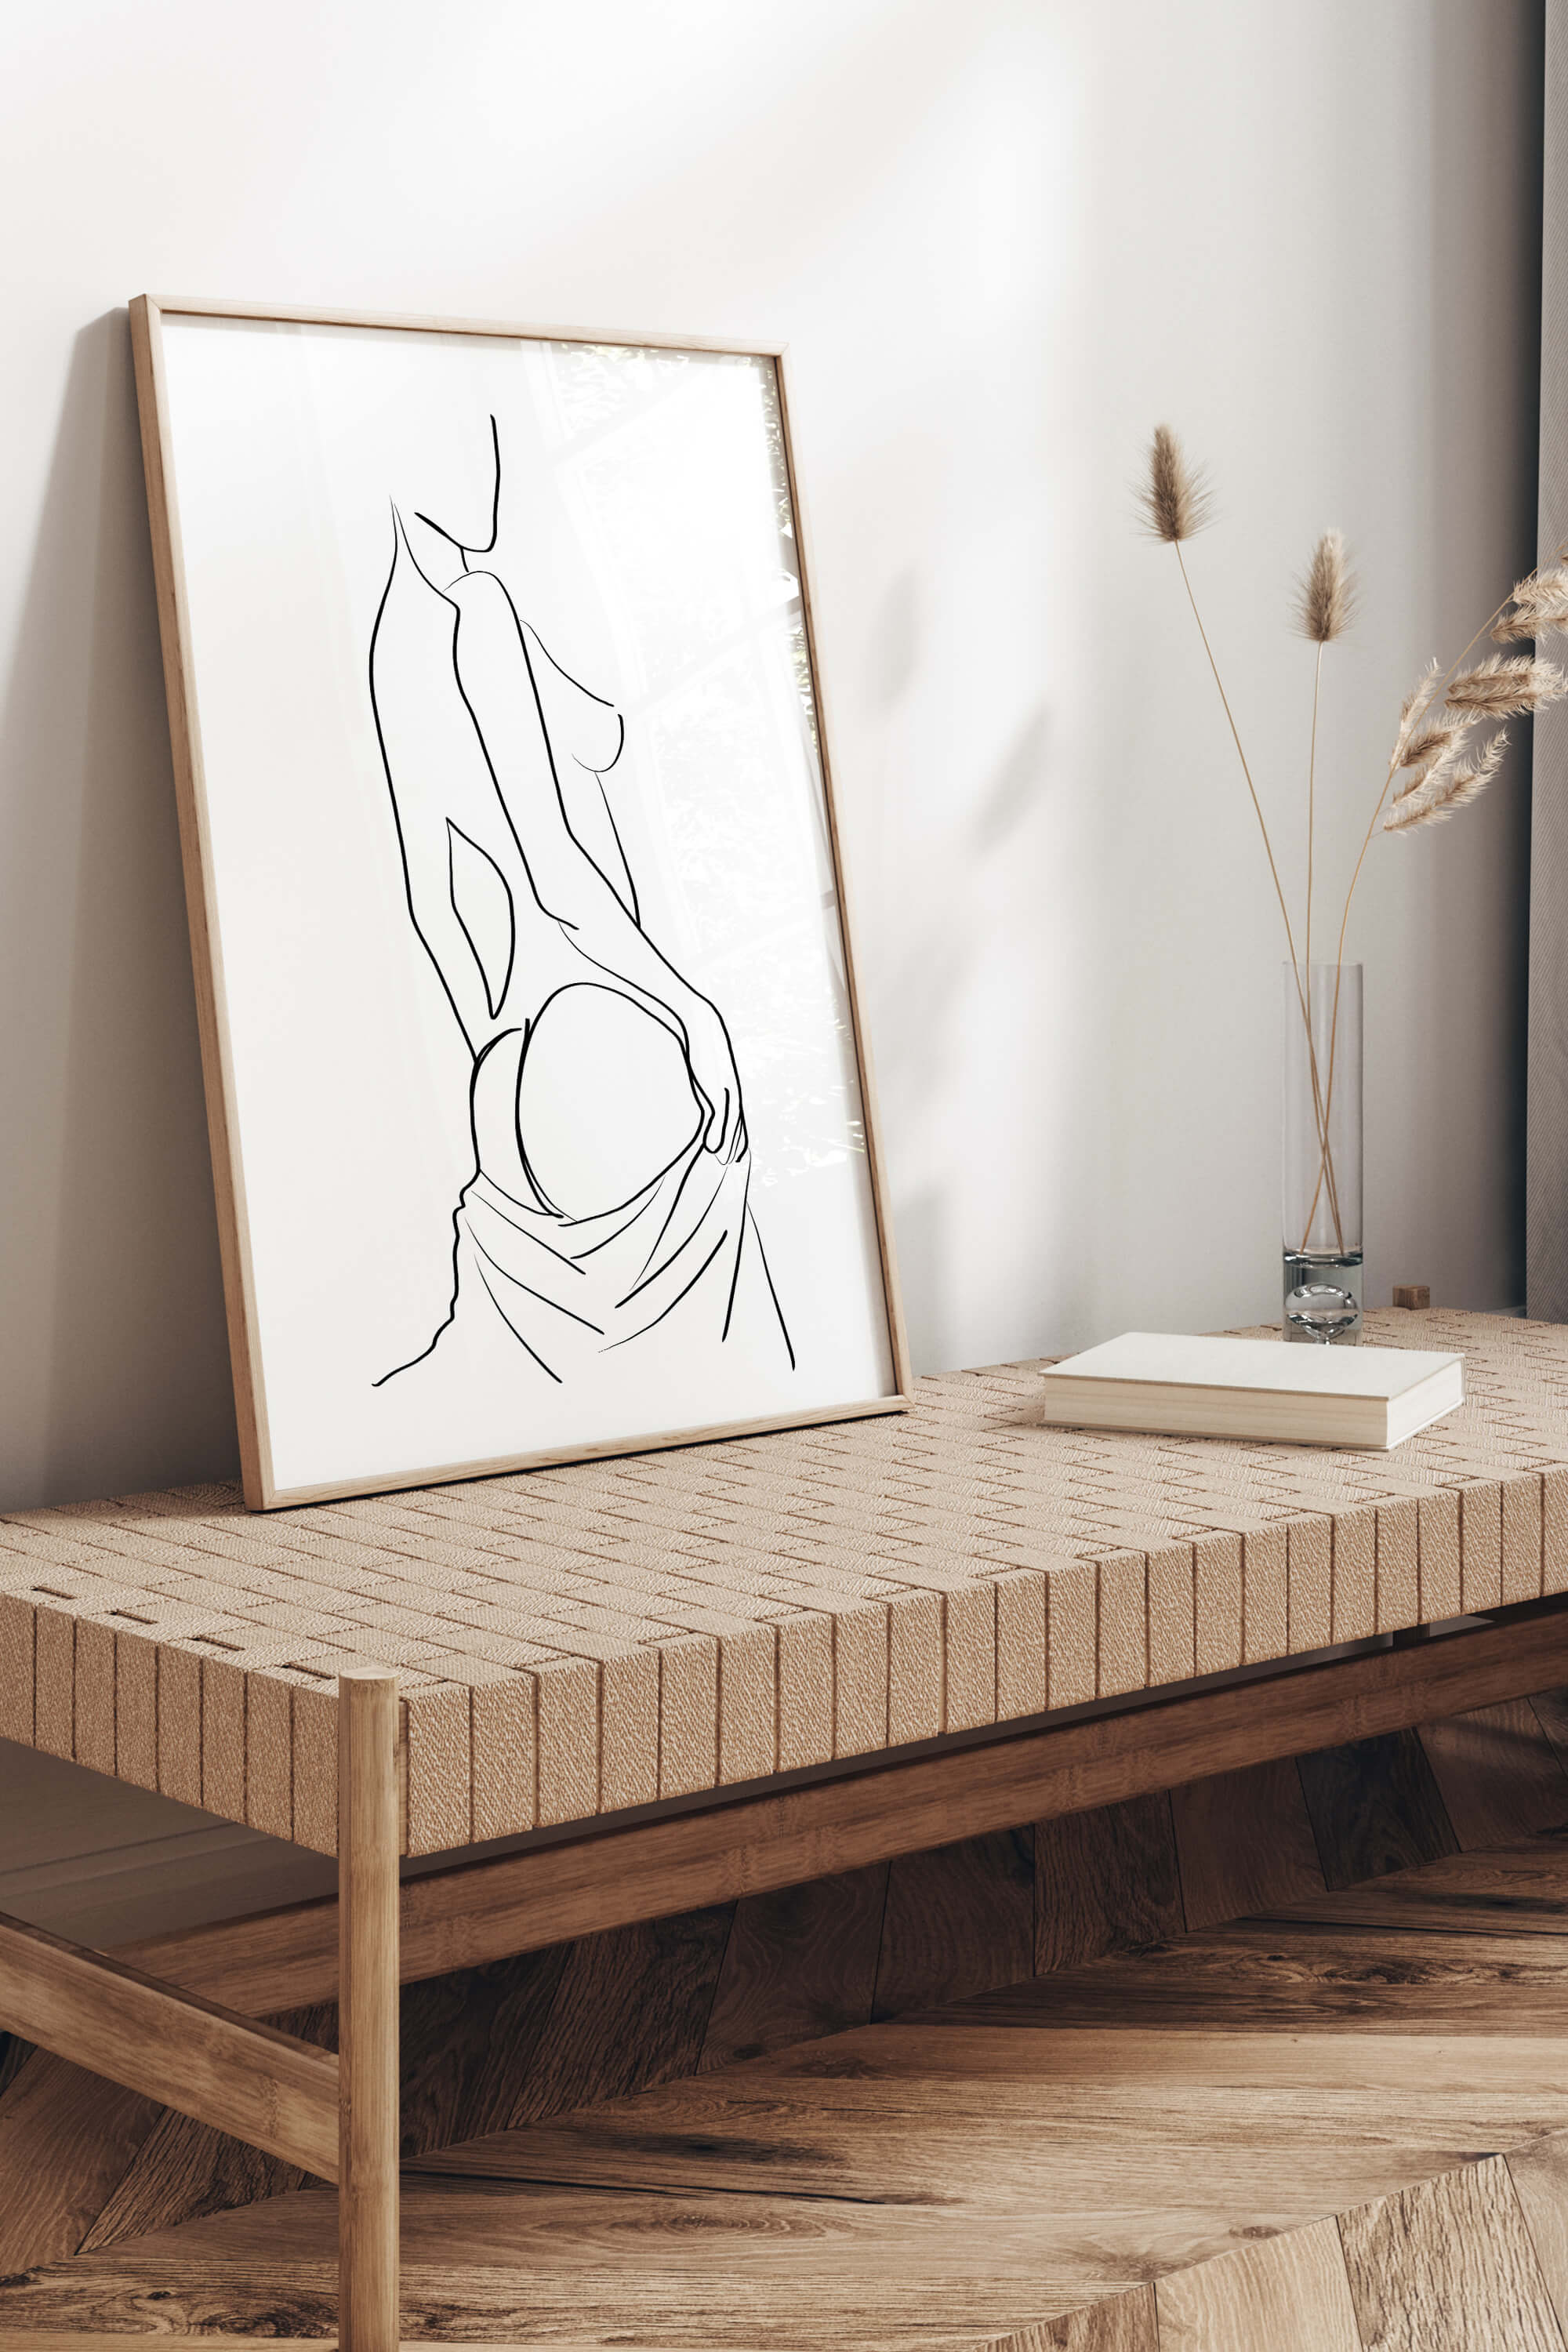 Immerse yourself in the symphony of sensuality with this elegant female line drawing. The black and white tones create a visual masterpiece, evoking a sense of charm and sophistication for a captivating wall display.